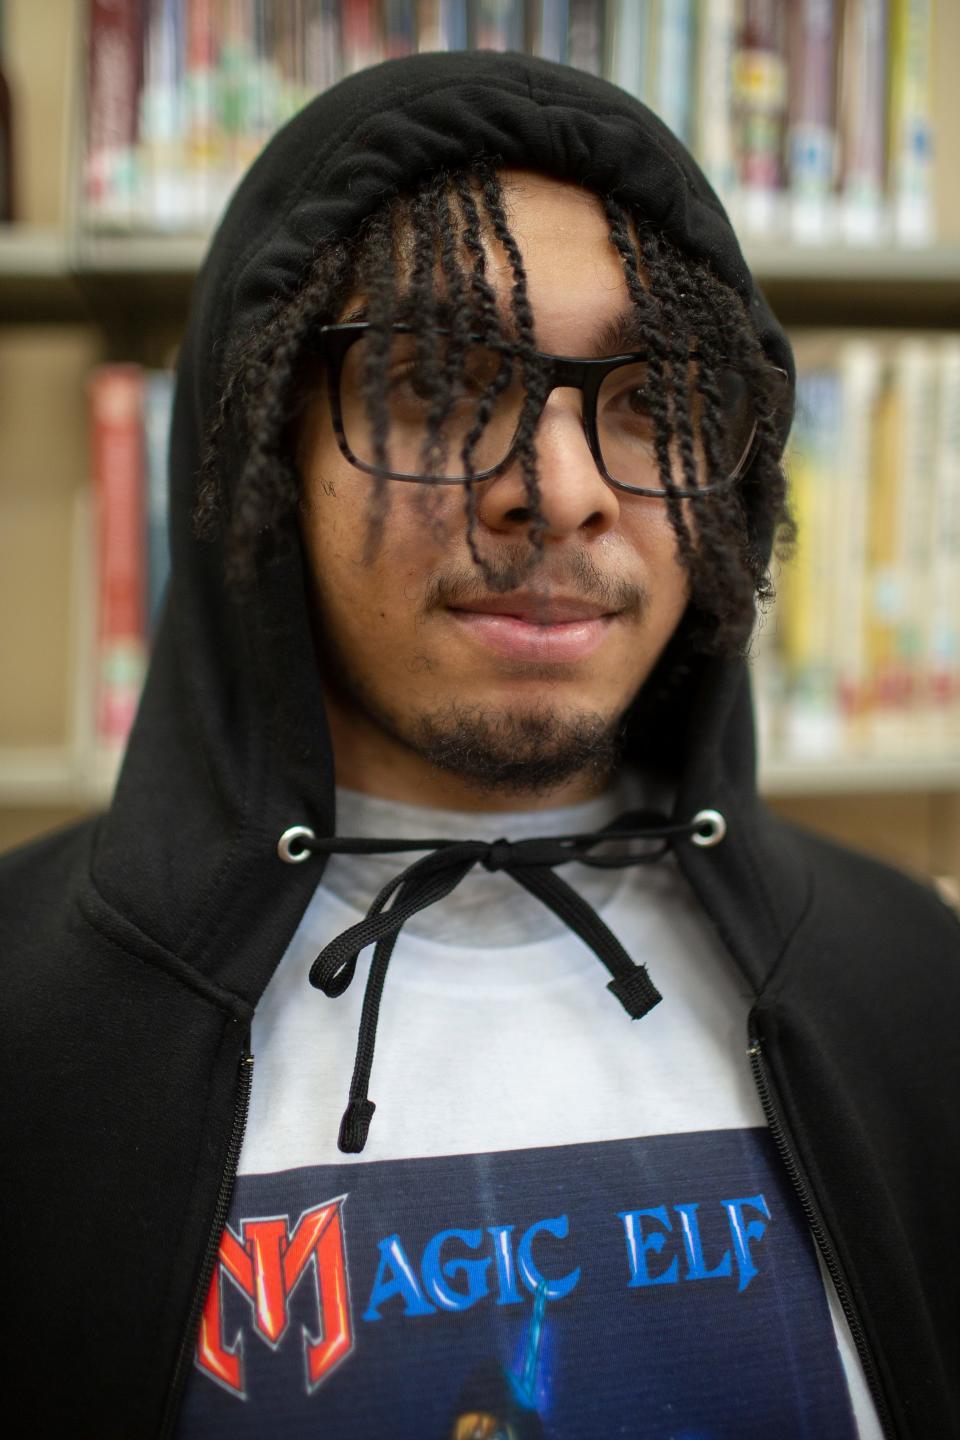 Ryon Conway poses for a portrait inside the Maury Couty Library in Columbia, Tenn., on Saturday, Feb. 19, 2022. 